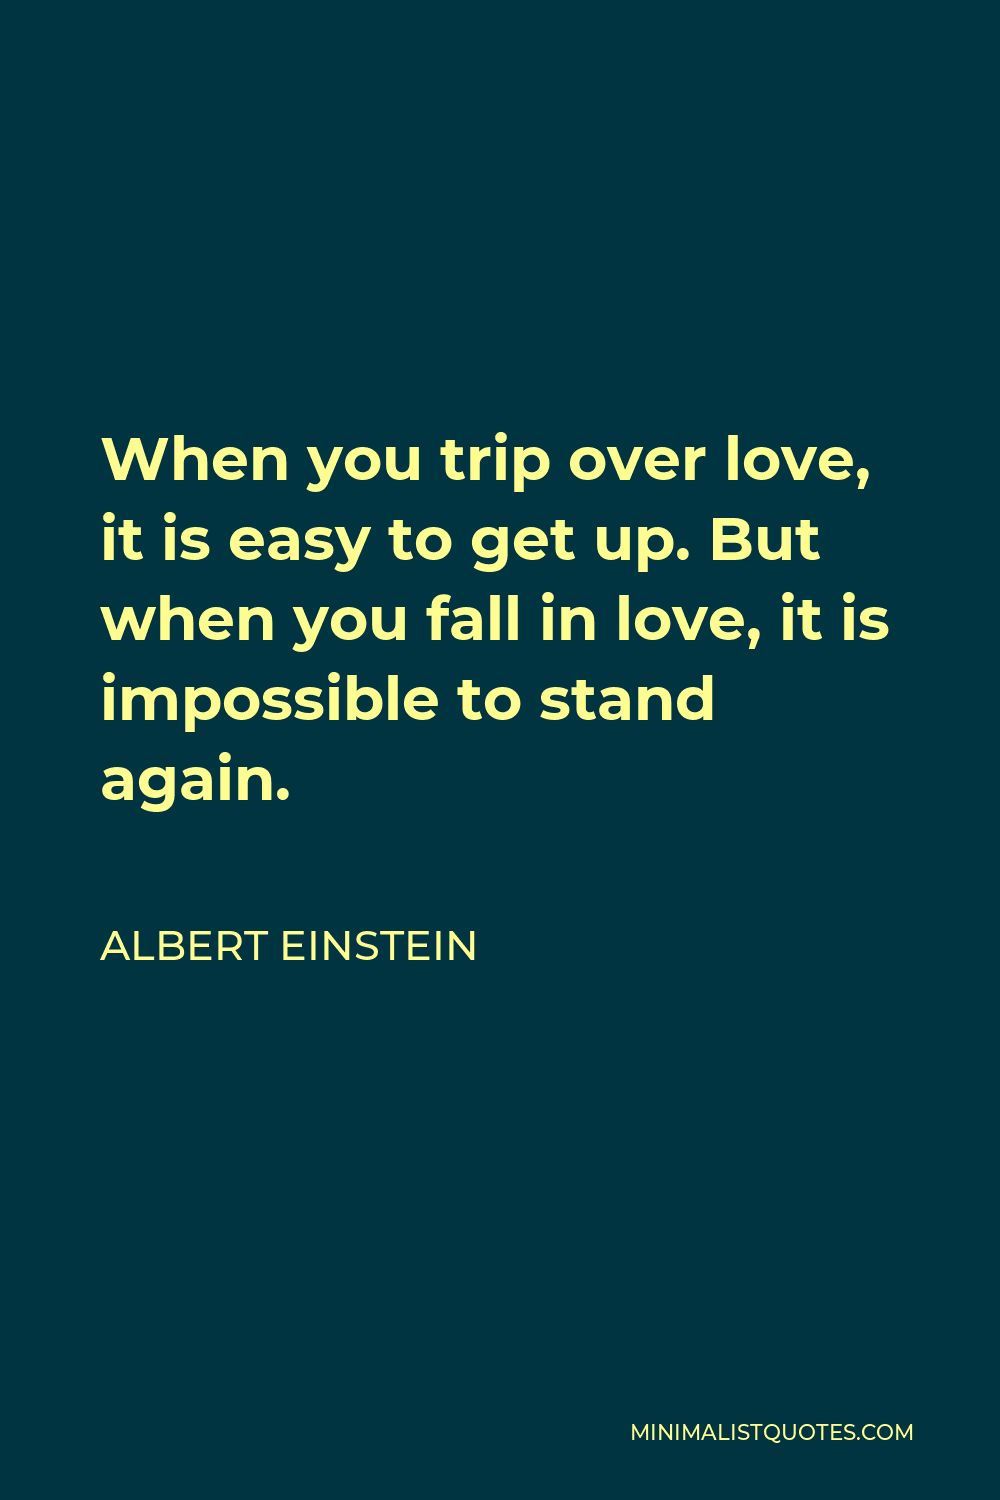 Albert Einstein Quote - When you trip over love, it is easy to get up. But when you fall in love, it is impossible to stand again.